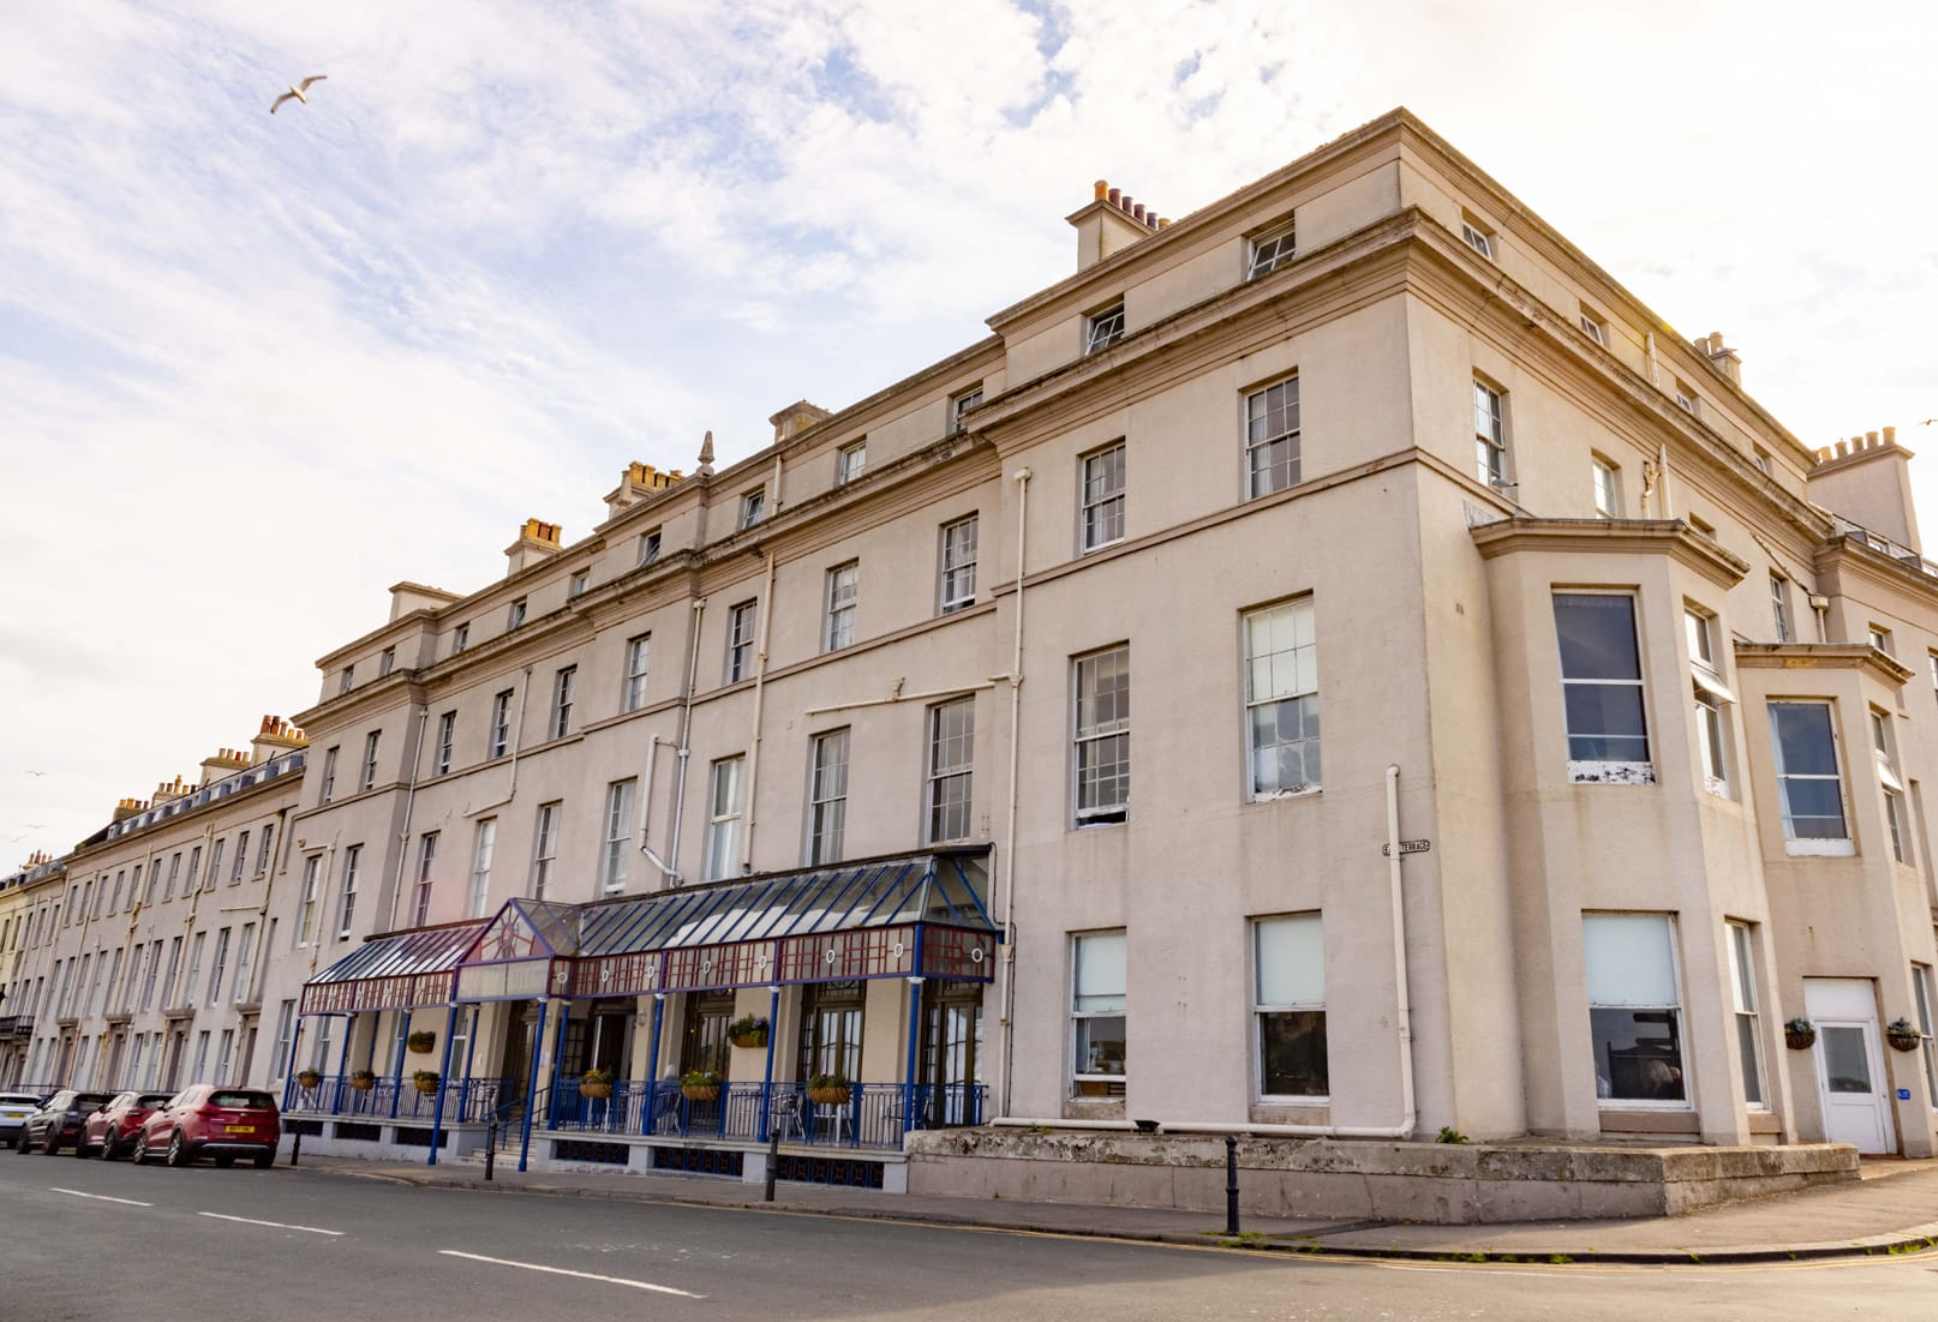 Royal Hotel Whitby1